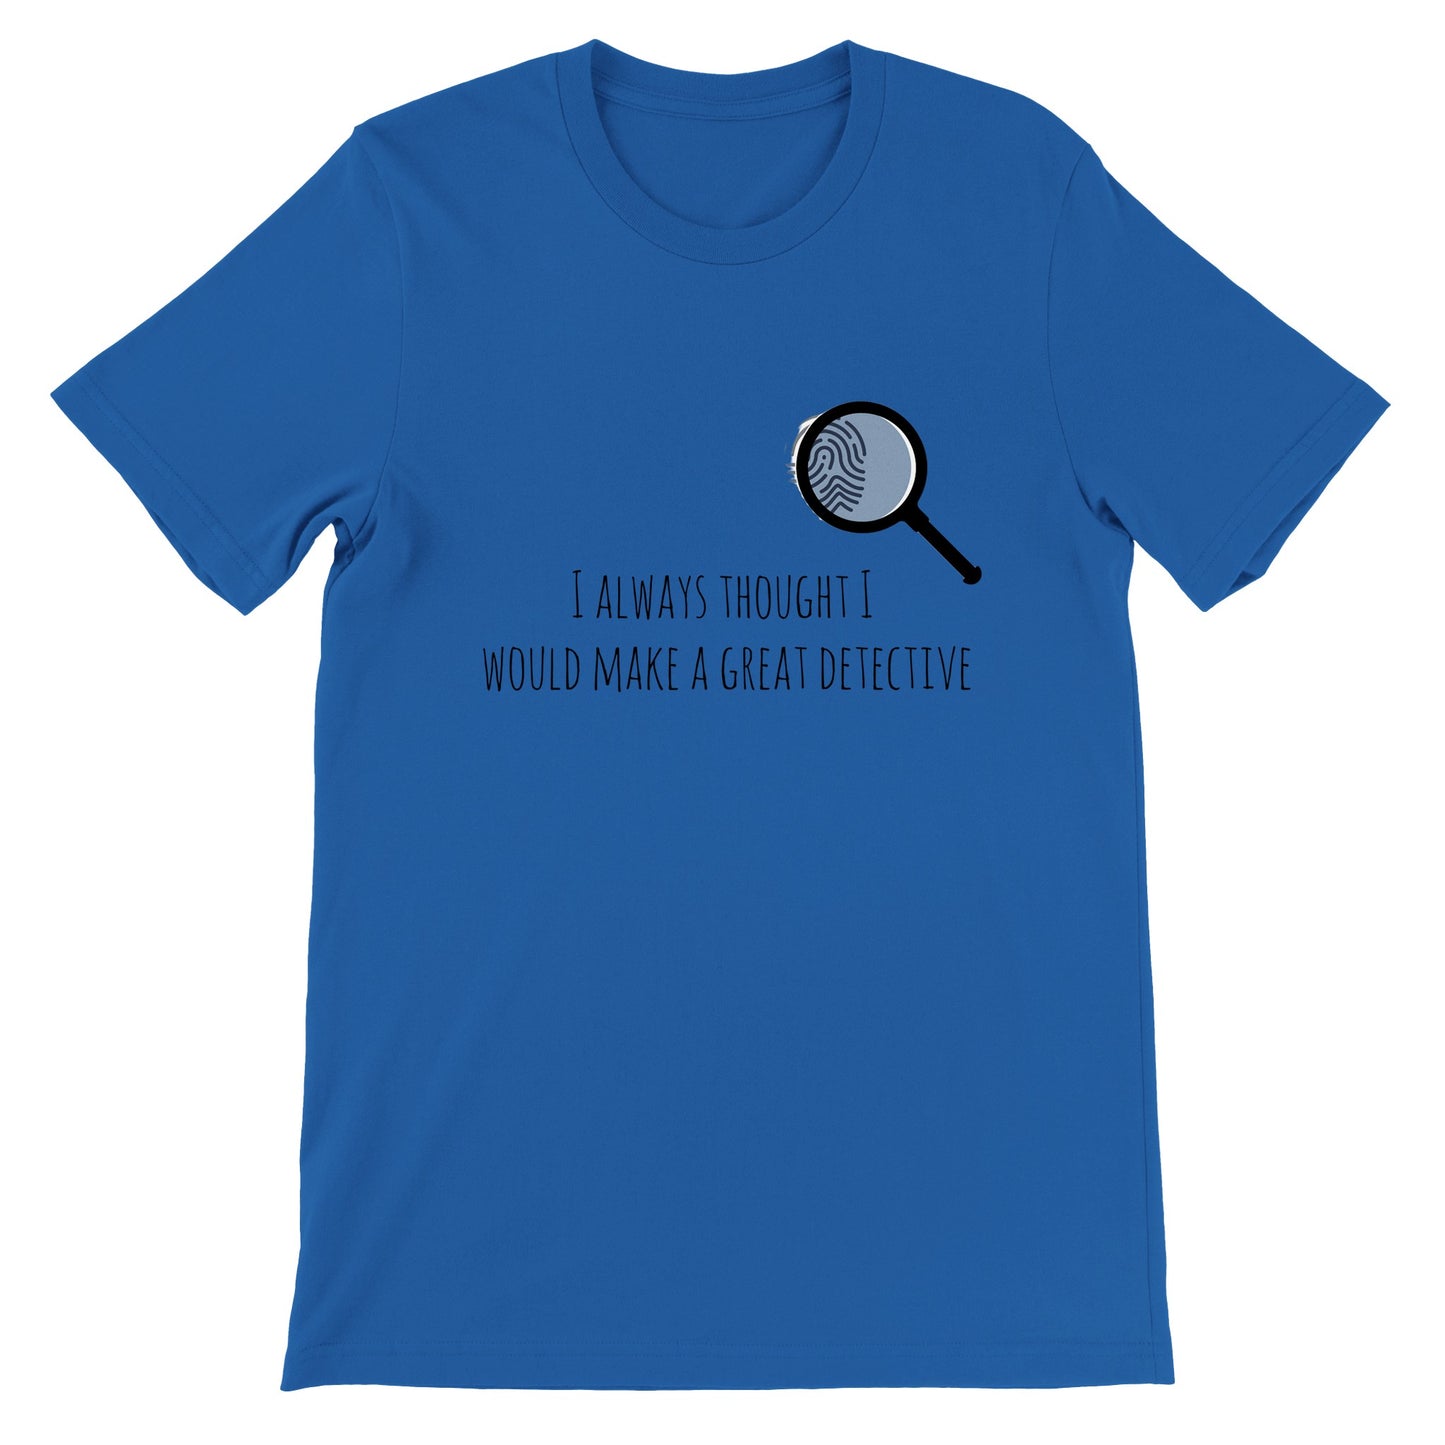 Short-Sleeve Unisex Crewneck T-shirt - I Always Thought I Would Make A Great Detective